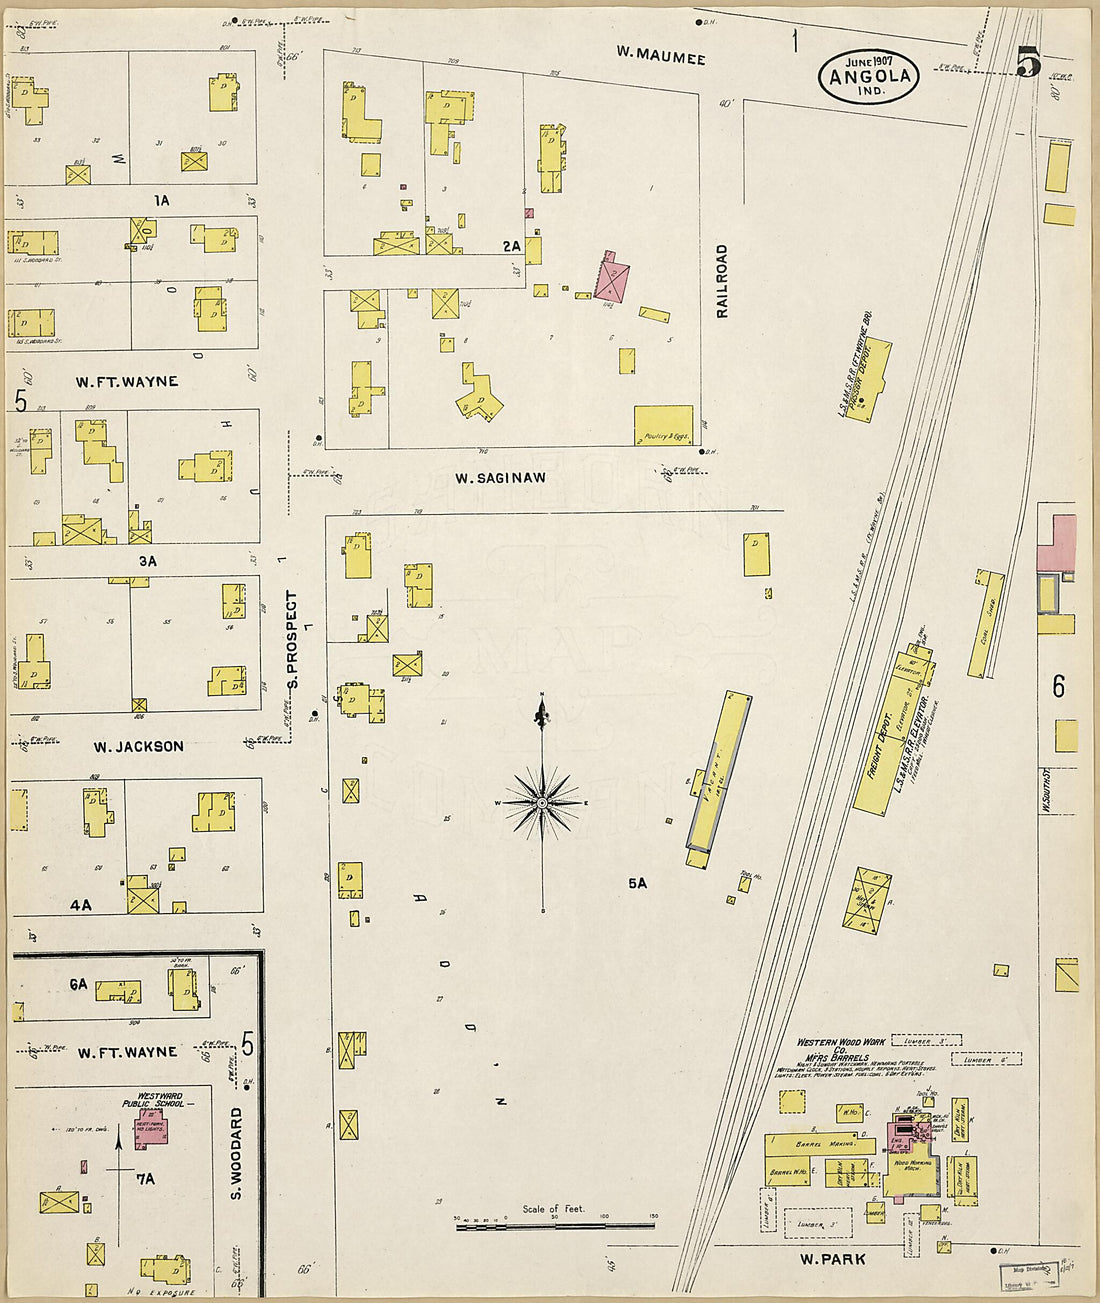 This old map of Angola, Steuben County, Indiana was created by Sanborn Map Company in 1907